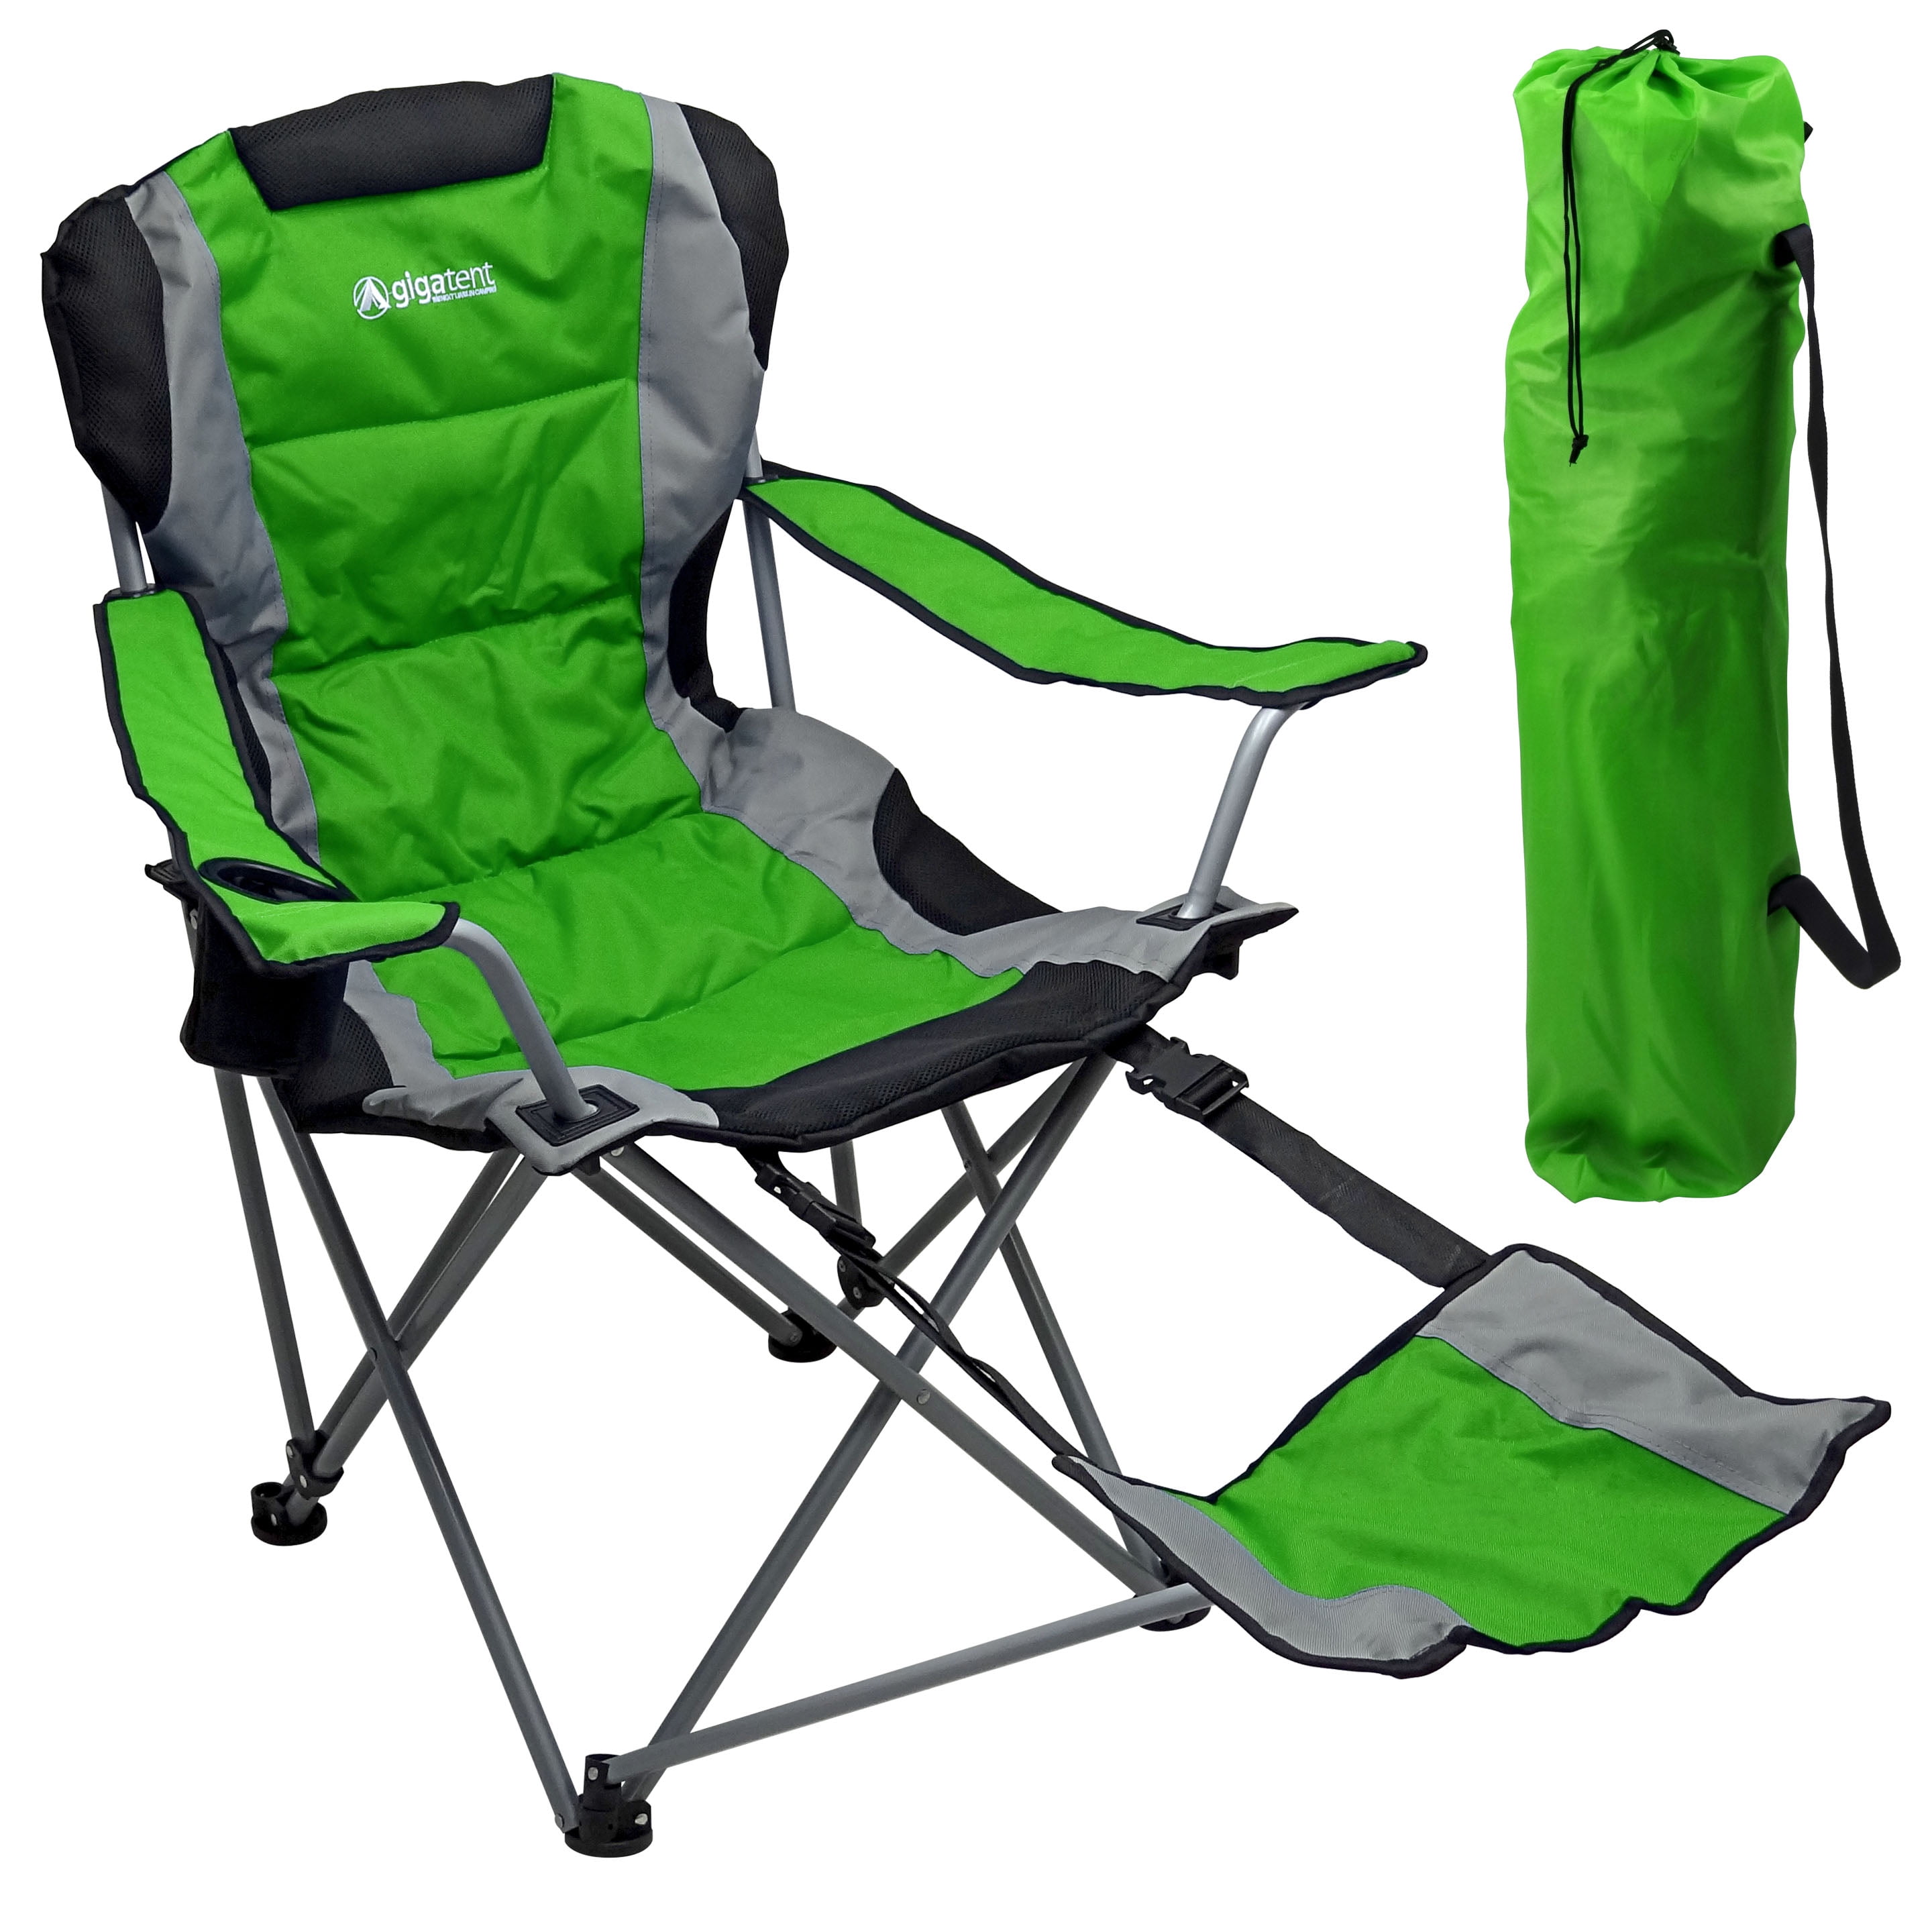 Gigatent Camping Chair with Footrest - Walmart.com